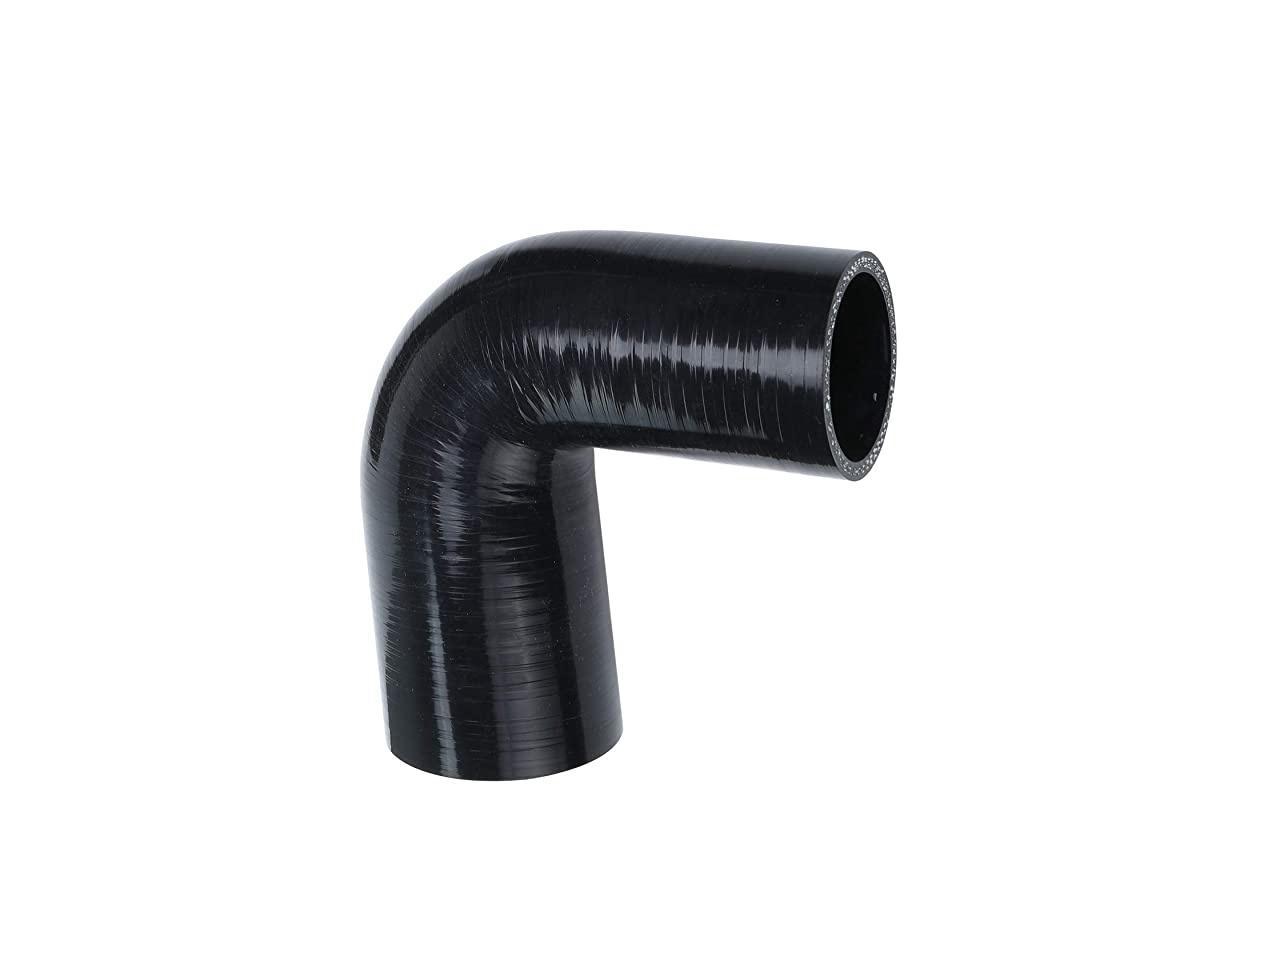 90 Degree Elbow Reducer Coupler 90mm Leg Length 3.5 3-Ply Reinforced 4.5mm 57mm to 76mm 80 PSI Maximum Pressure,Universal Automotive Silicone Hose,Black ID 2.25 to 3 Wall Thickness 0.18 